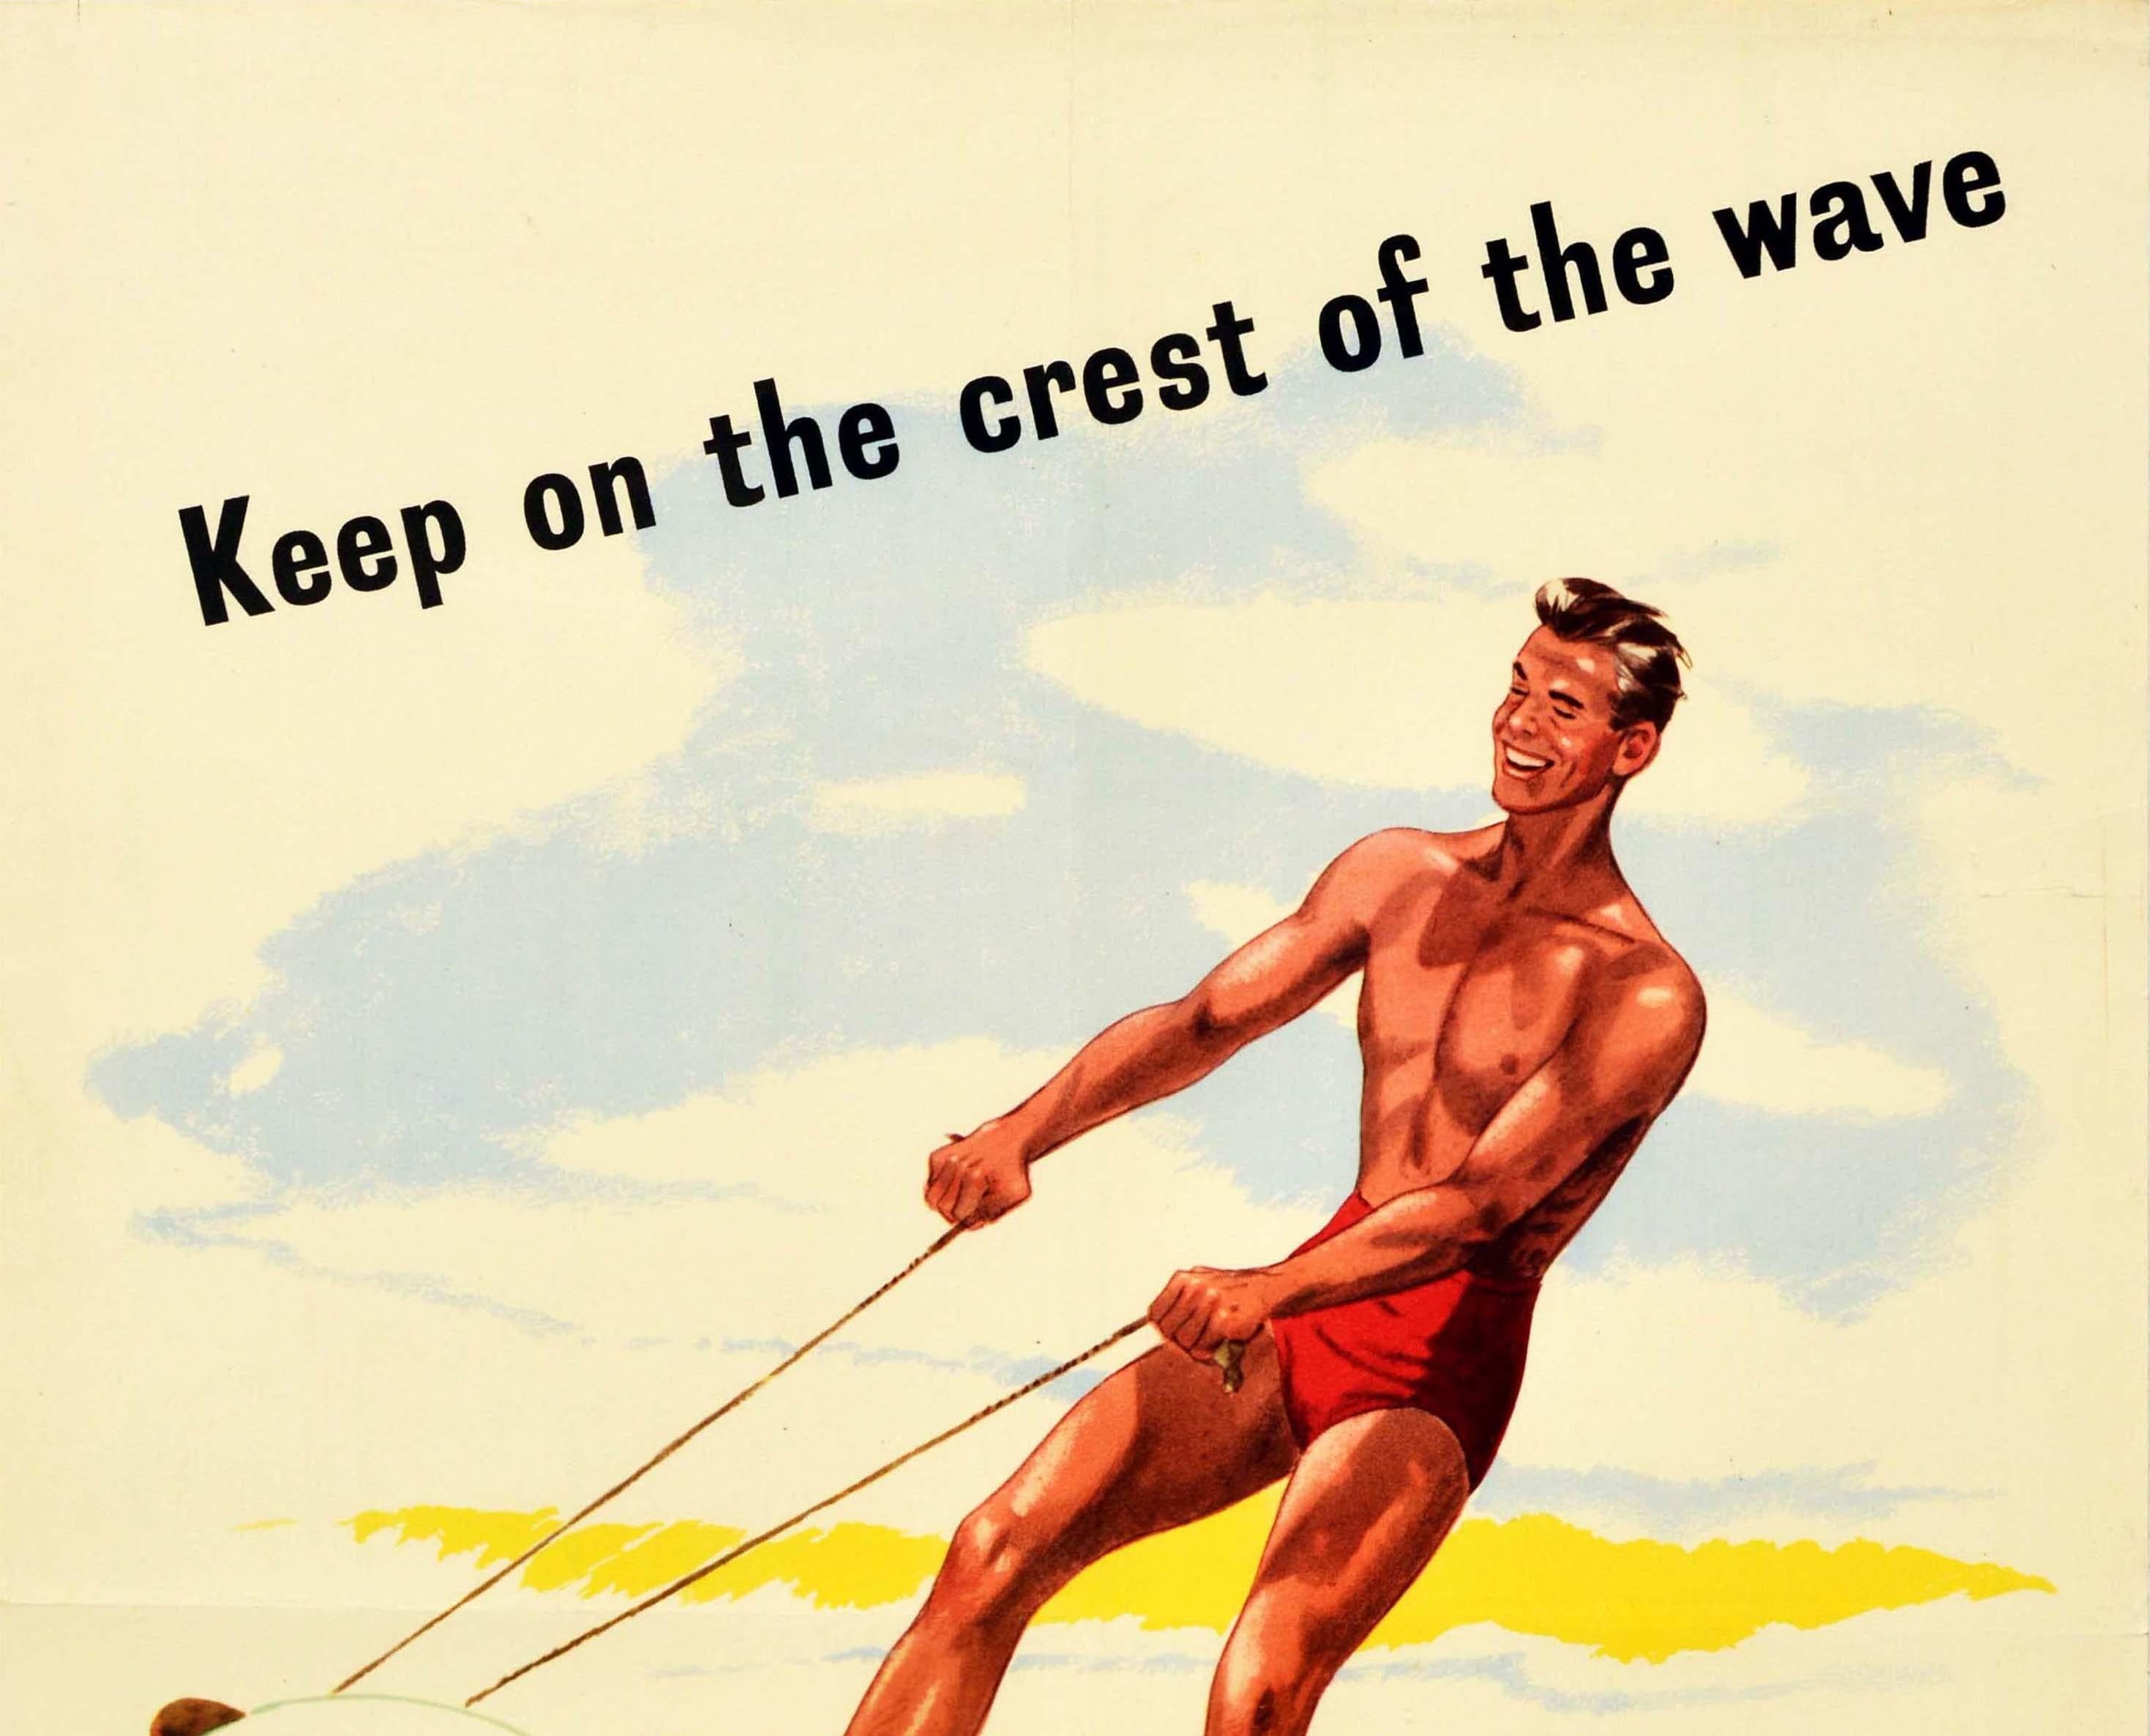 Original vintage advertising poster for National Savings featuring a great image of a smiling surfer on a board riding the waves with the message diagonally above and below - Keep on the crest of the wave keep on with National Savings after your